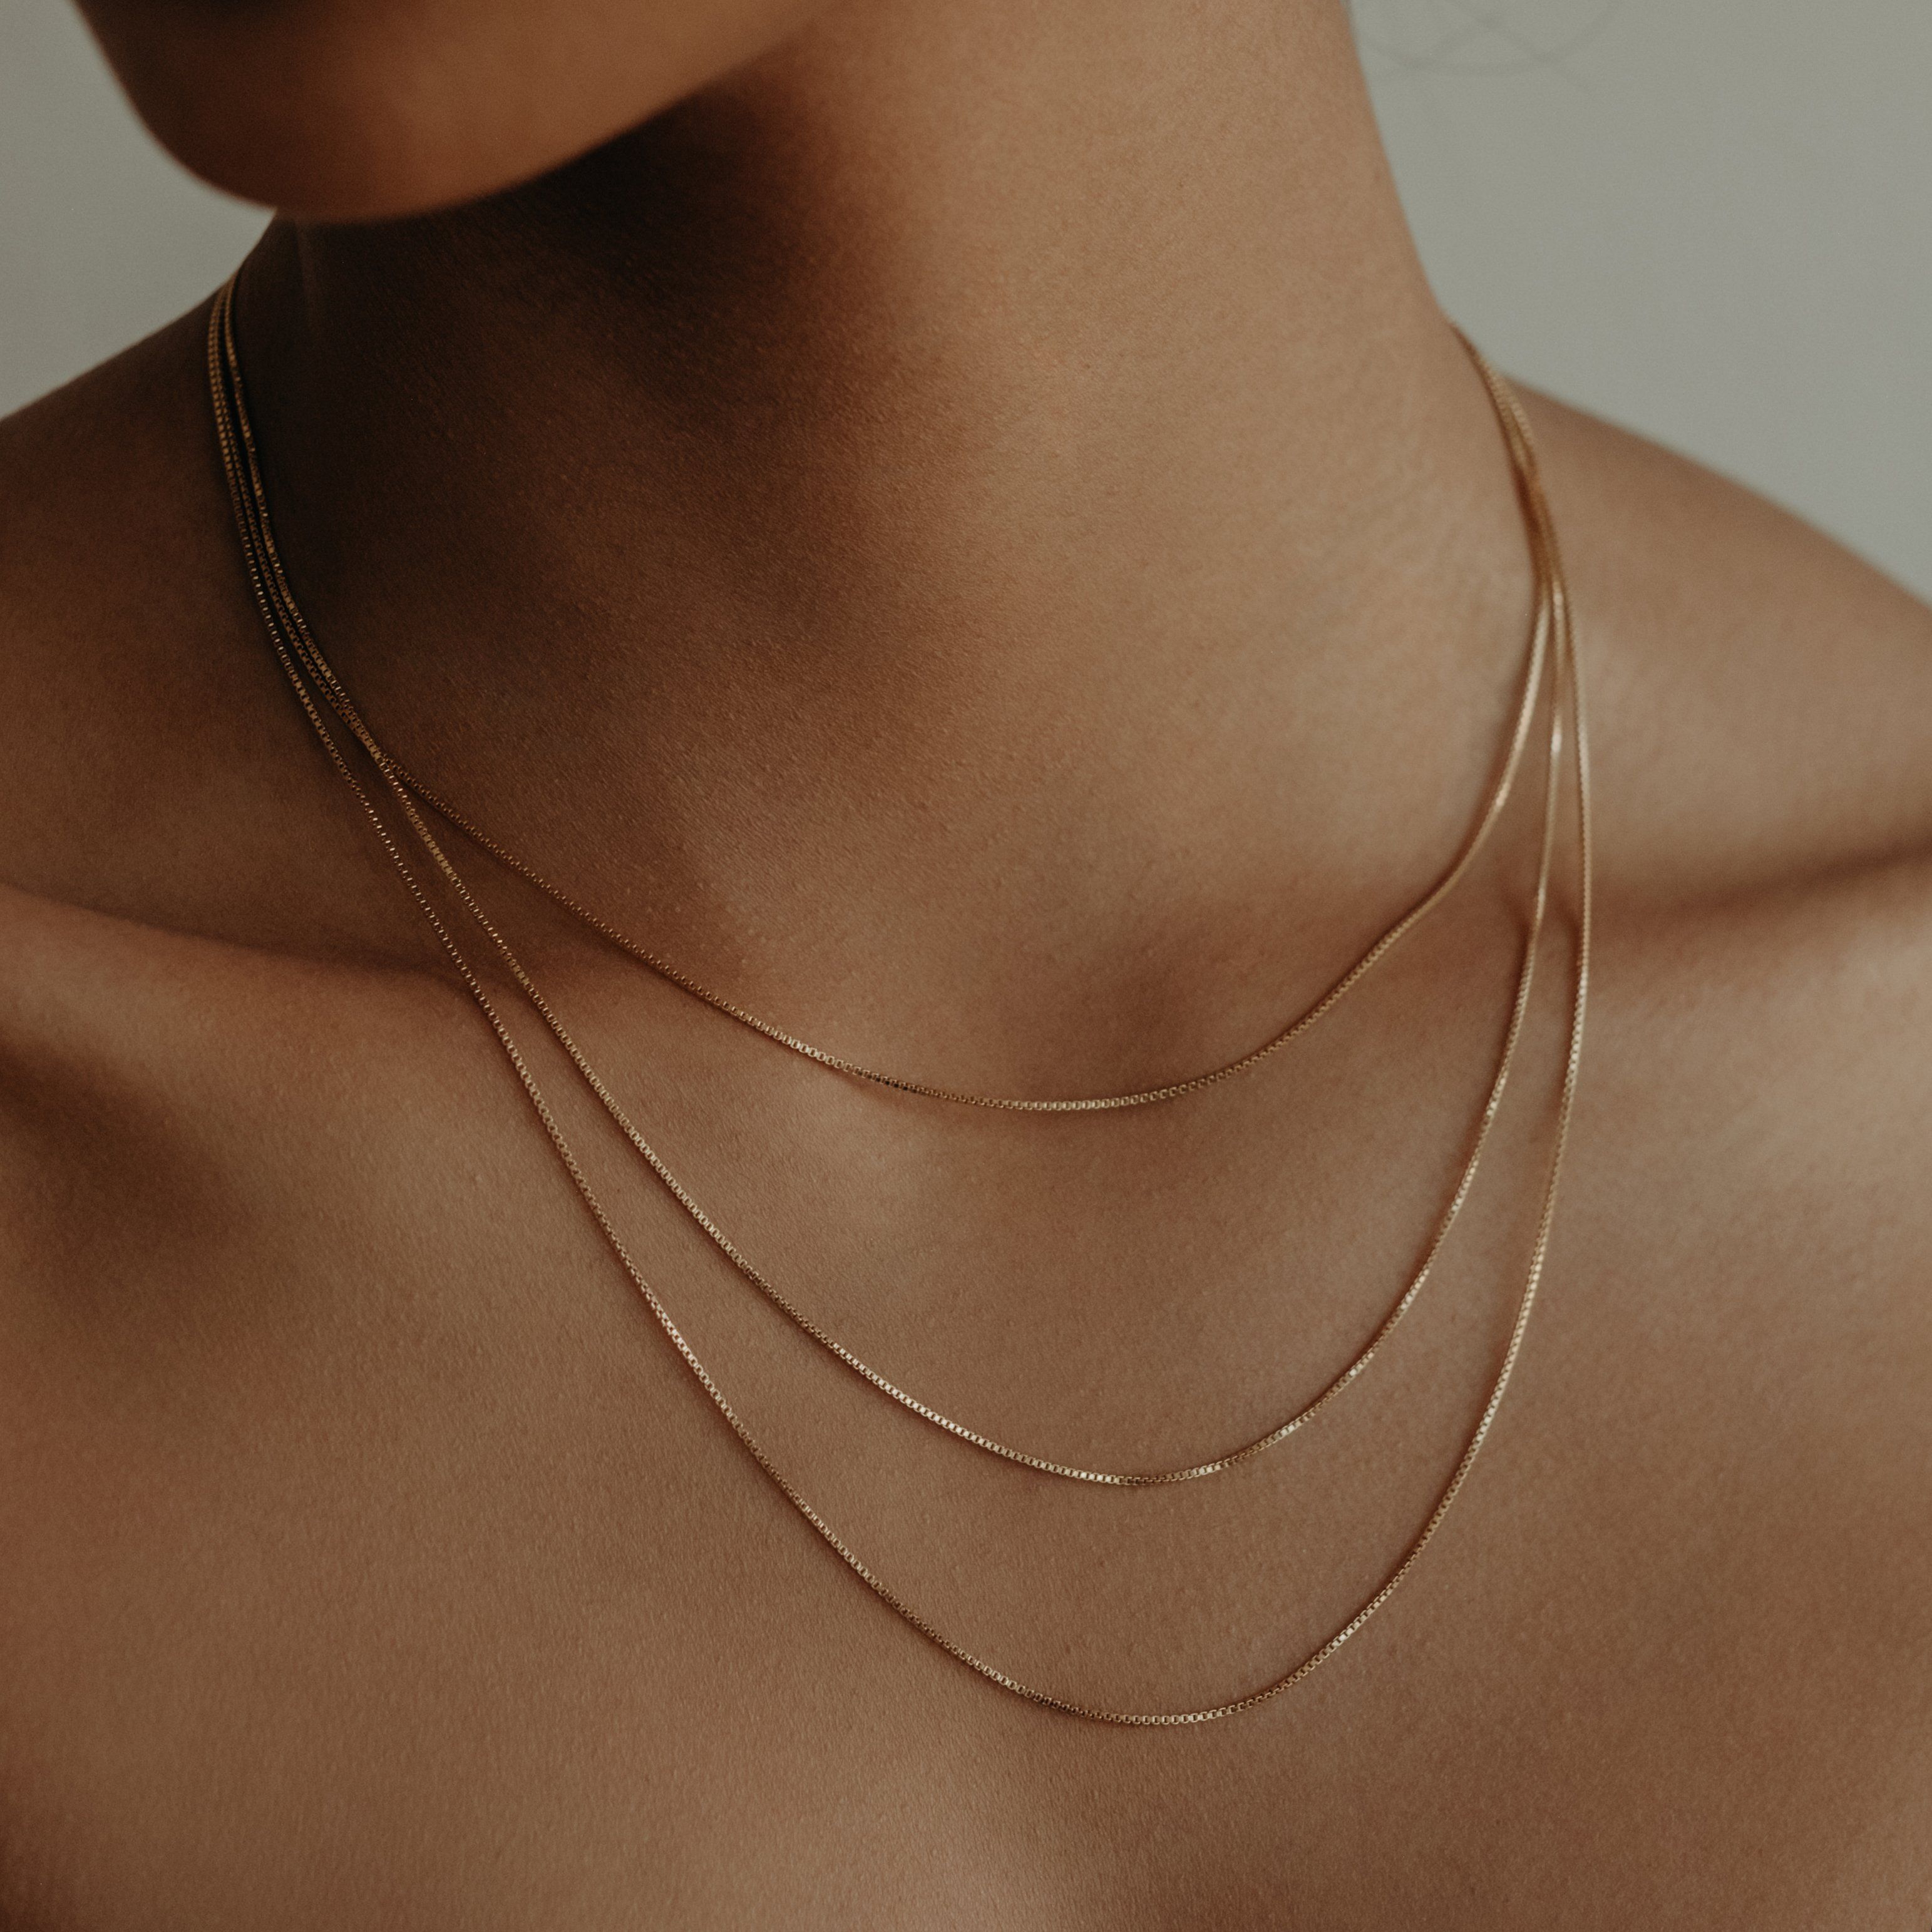 Metal Color: 1 Pcs Rose, Length: 40cm Davitu Womens Fashion 100% 925 Real Sterling Silver Jewelry Box Chain Collarbone Chain Short Necklace Gift Girl Lady DC02 